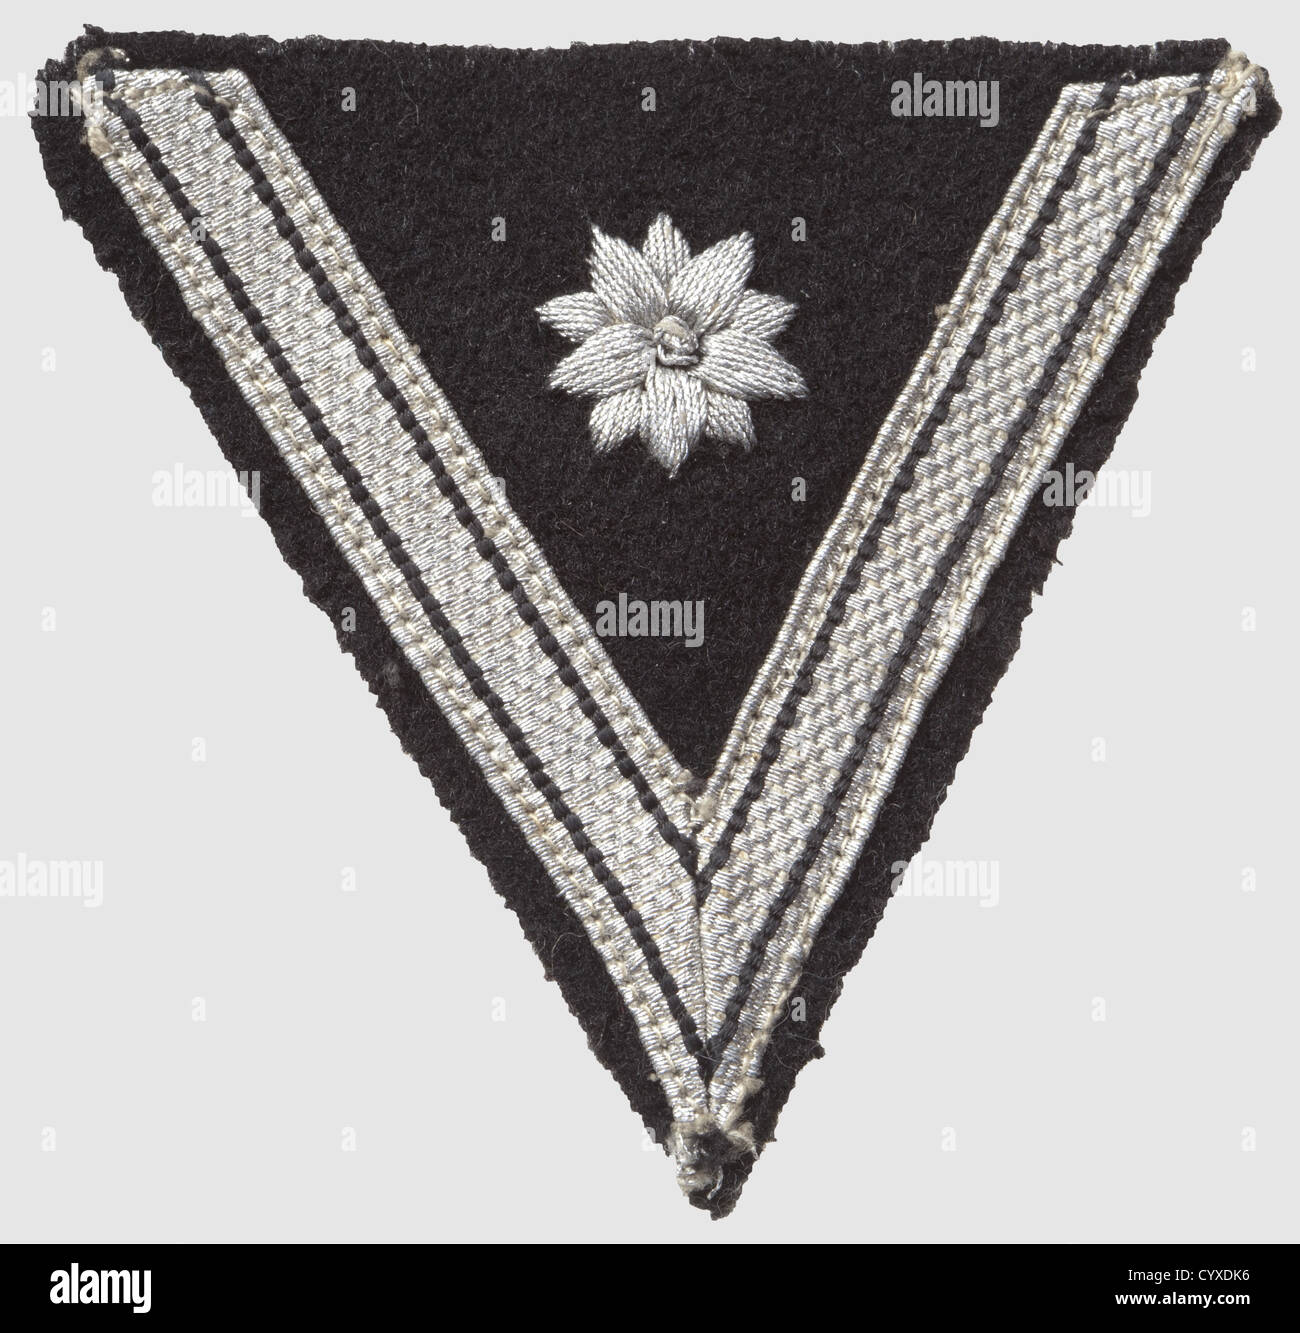 Chevron for 'Old Campaigners', for a member who previously served in Wehrmacht or police. Silver lace and hand-embroidered star on black cloth, on the back RZM-label 'RZM 175/36 SS', historic, historical, 1930s, 1930s, 20th century, SS, Schutzstaffel, NS, National Socialism, Nazism, Third Reich, German Reich, branch of service, branches of service, organisation, organization, organizations, organisations, object, objects, clipping, cut out, cut-out, cut-outs, insignia, symbol, symbols, equipment, uniform, uniforms, detail, details, Additional-Rights-Clearences-Not Available Stock Photo